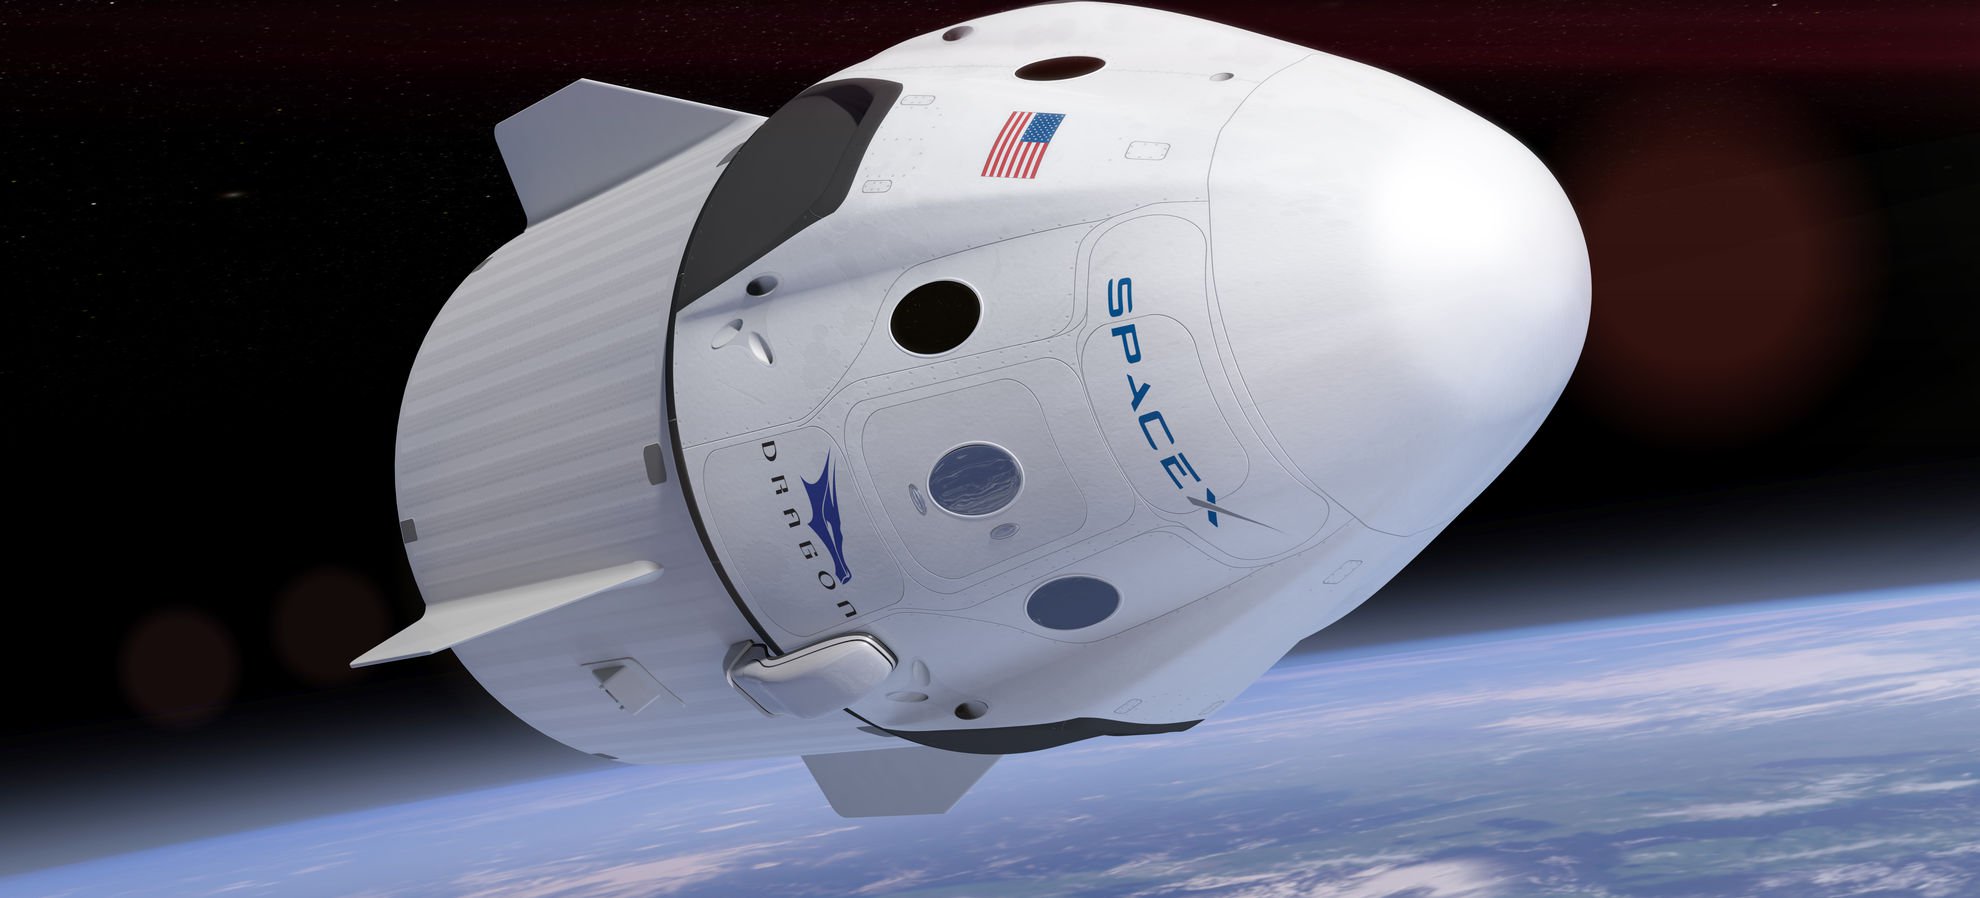 Boeing peut financer une campagne contre SpaceX